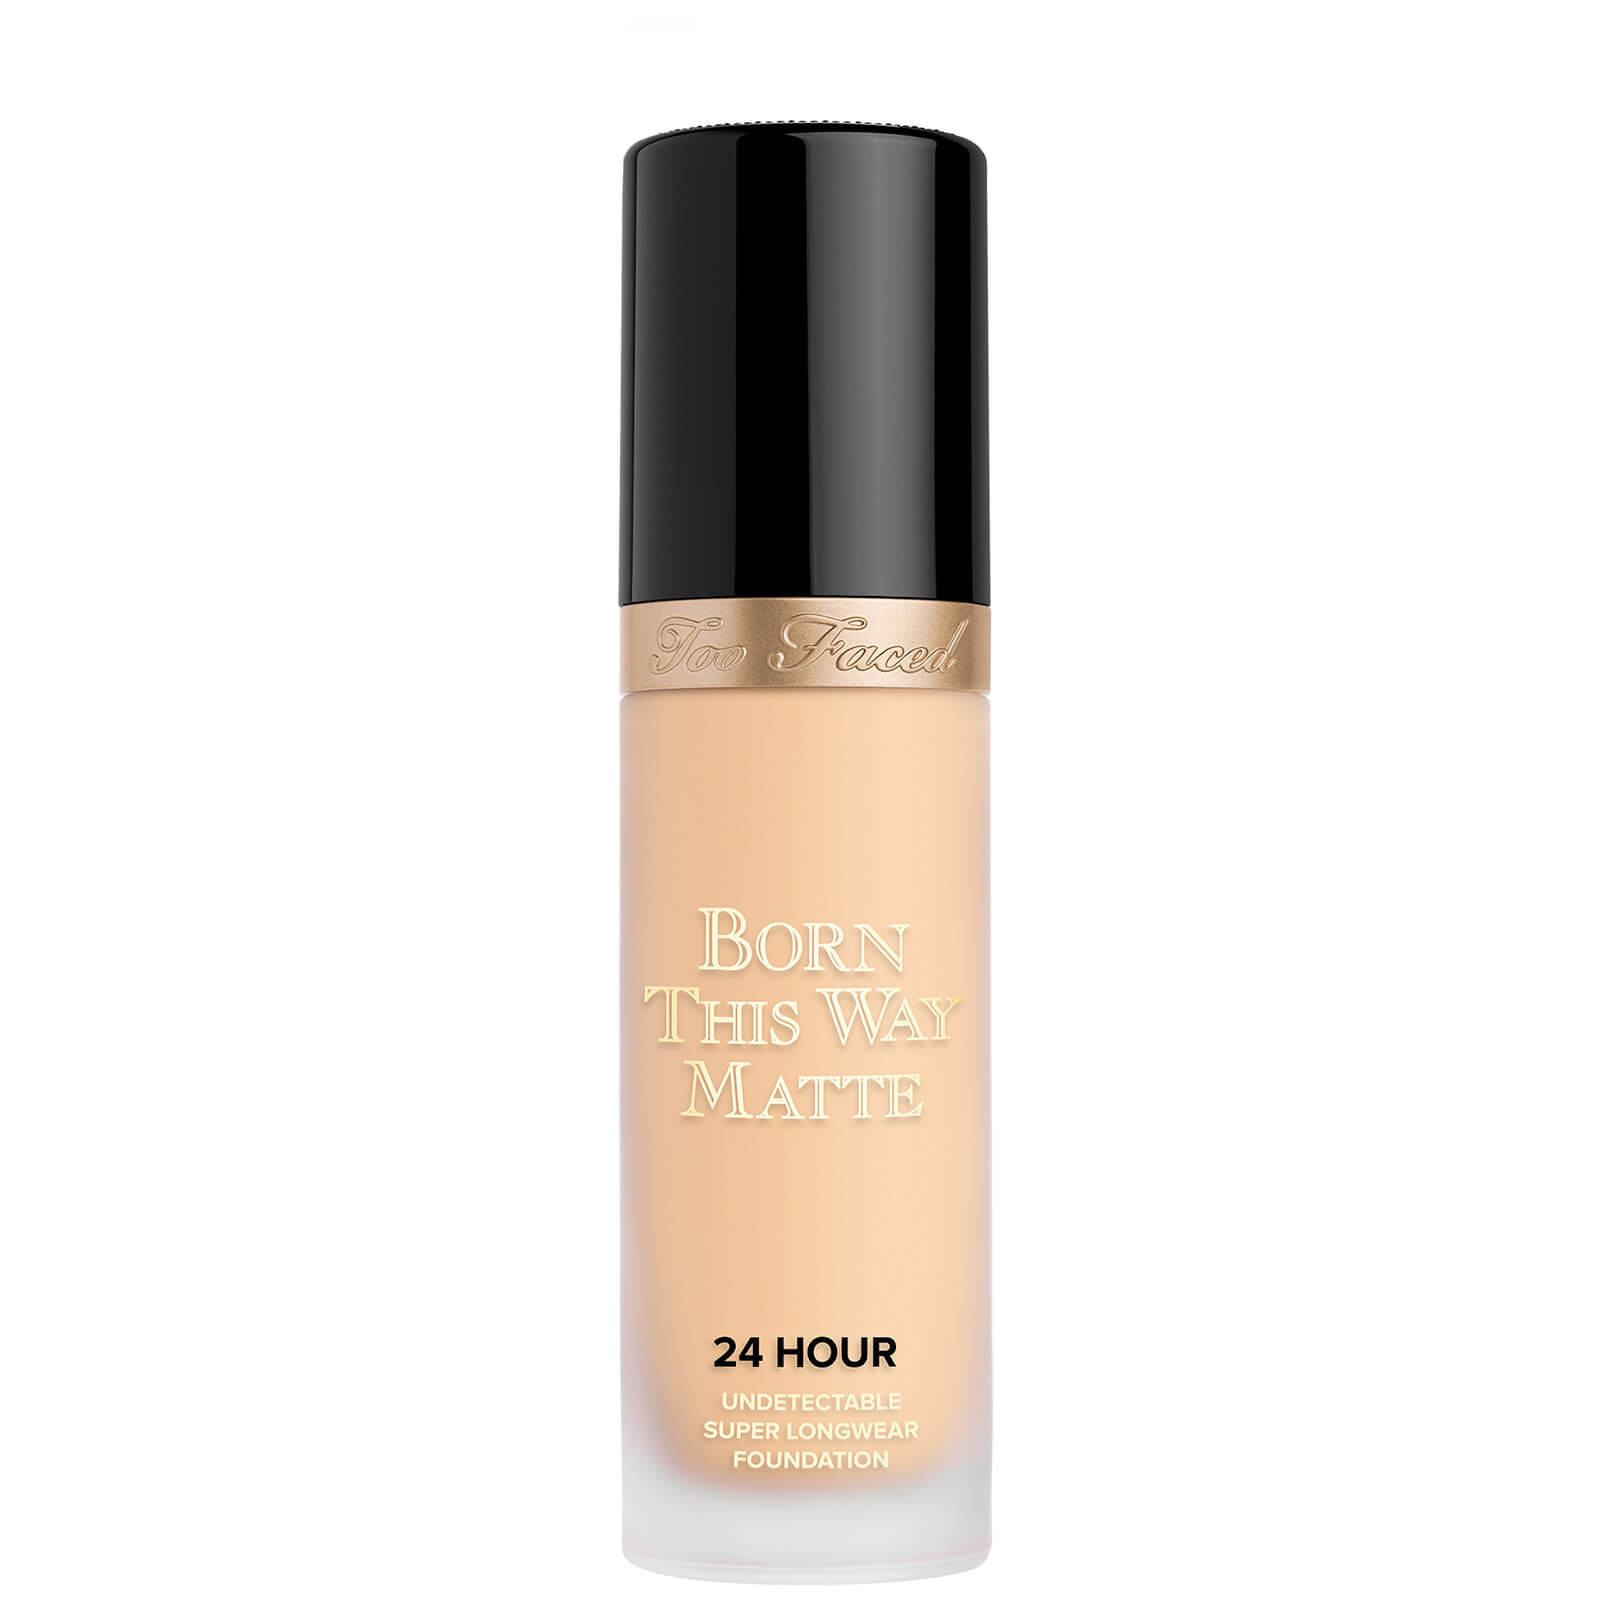 Too Faced Born This Way Matte 24 Hour Long-Wear Foundation 30ml (Various Shades) - Almond